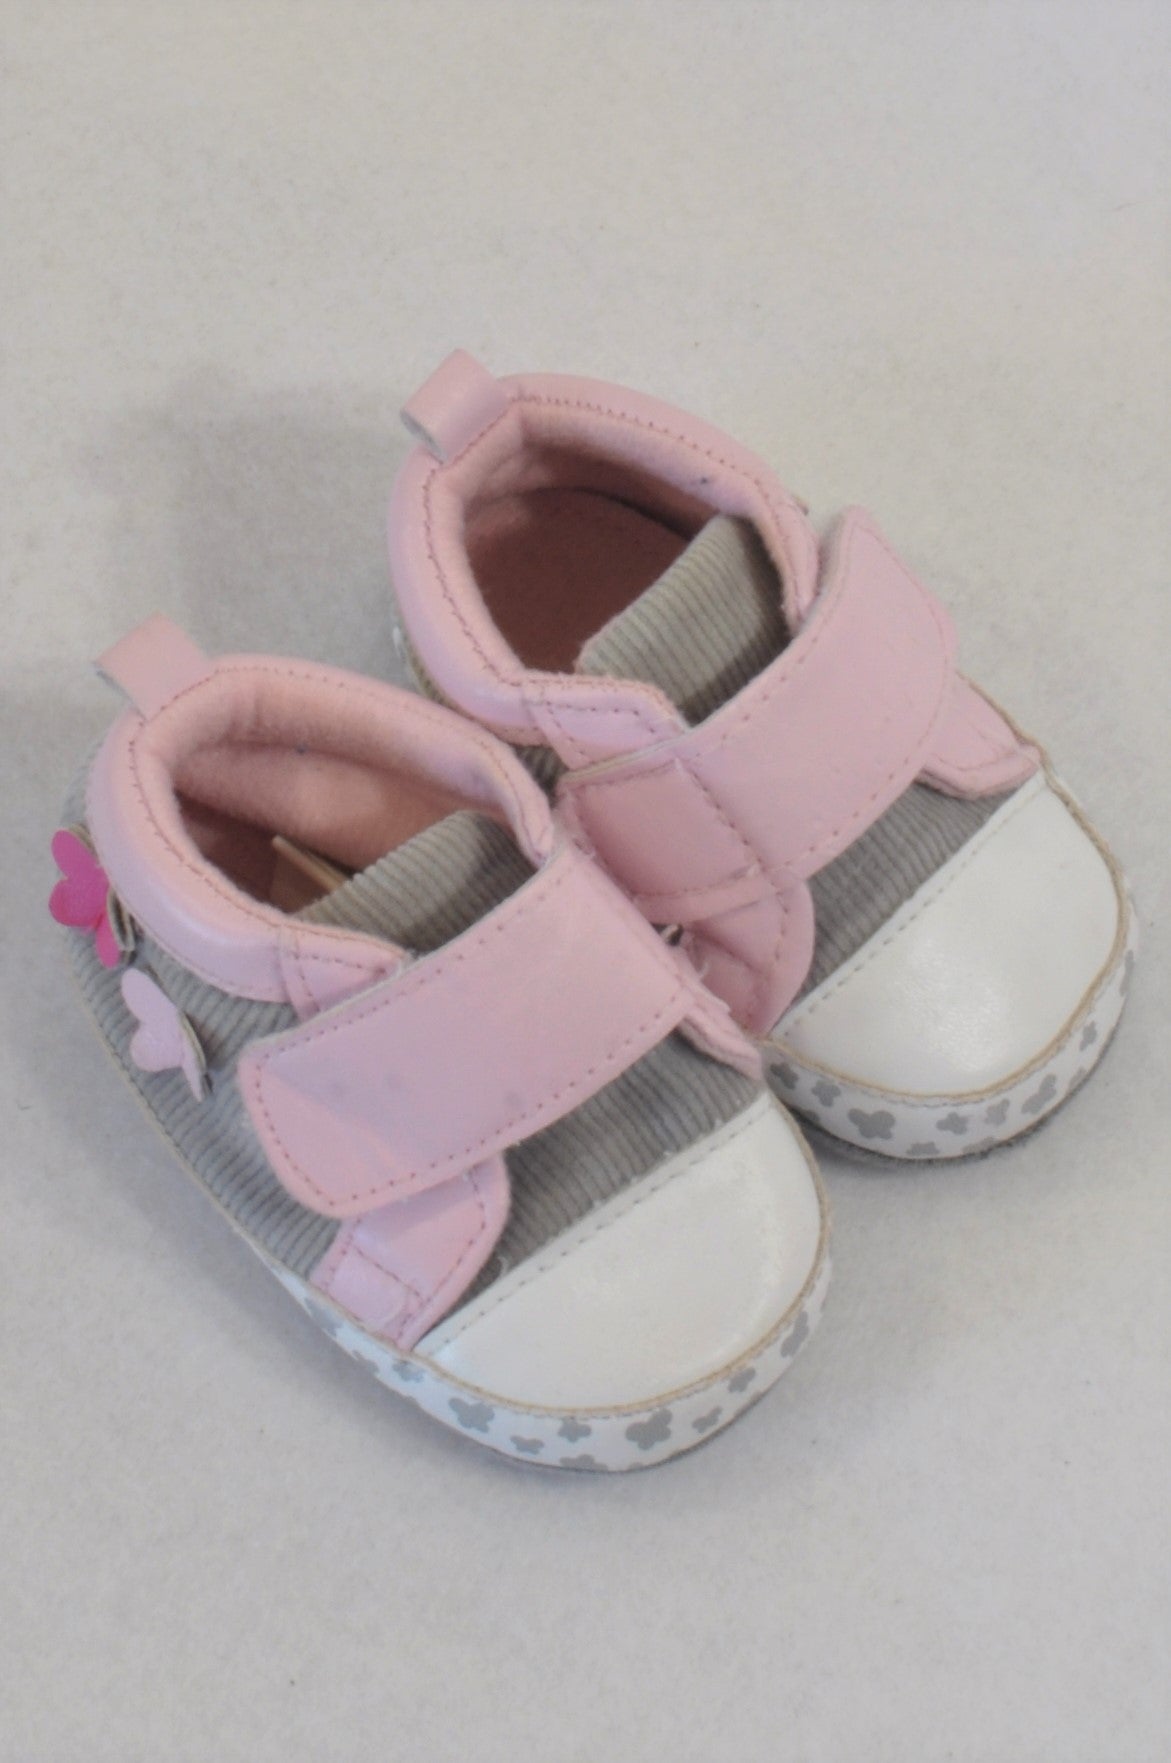 ackermans baby girl shoes Shop Clothing & Shoes Online